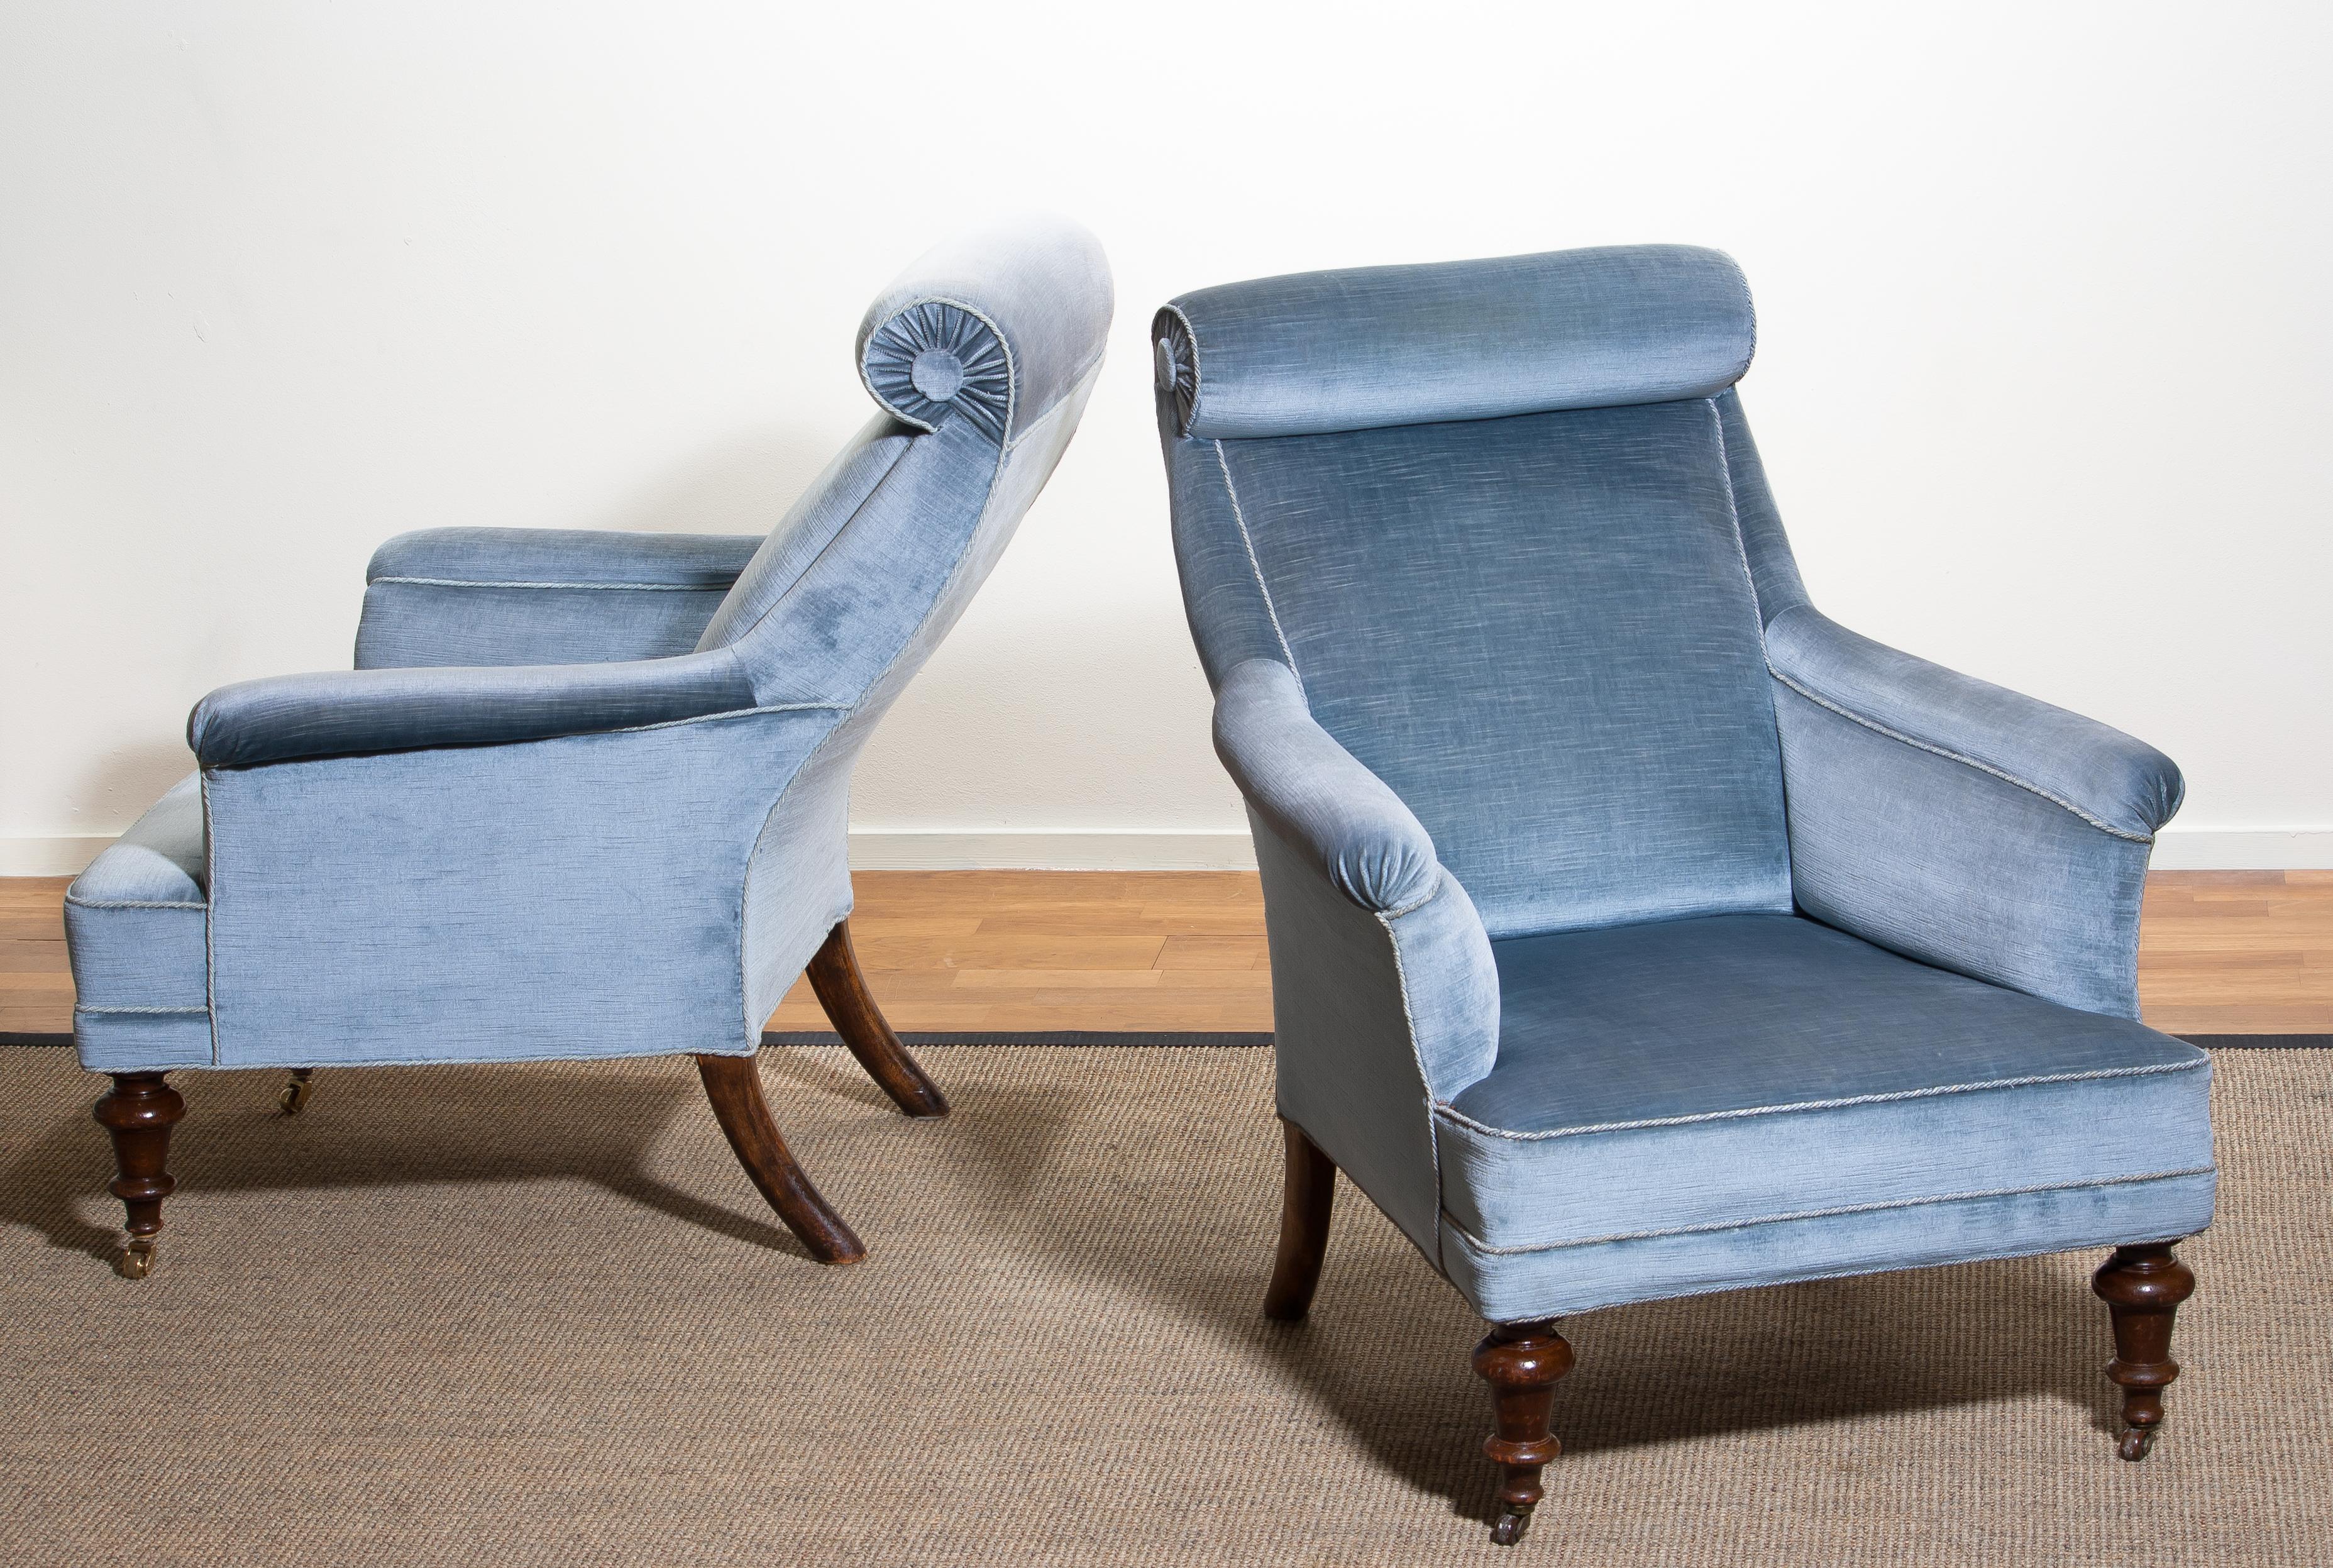 American Classical 1900s Set of Two Ice Blue Velvet Dorothy Draper Style Bergère Club Lounge Chairs